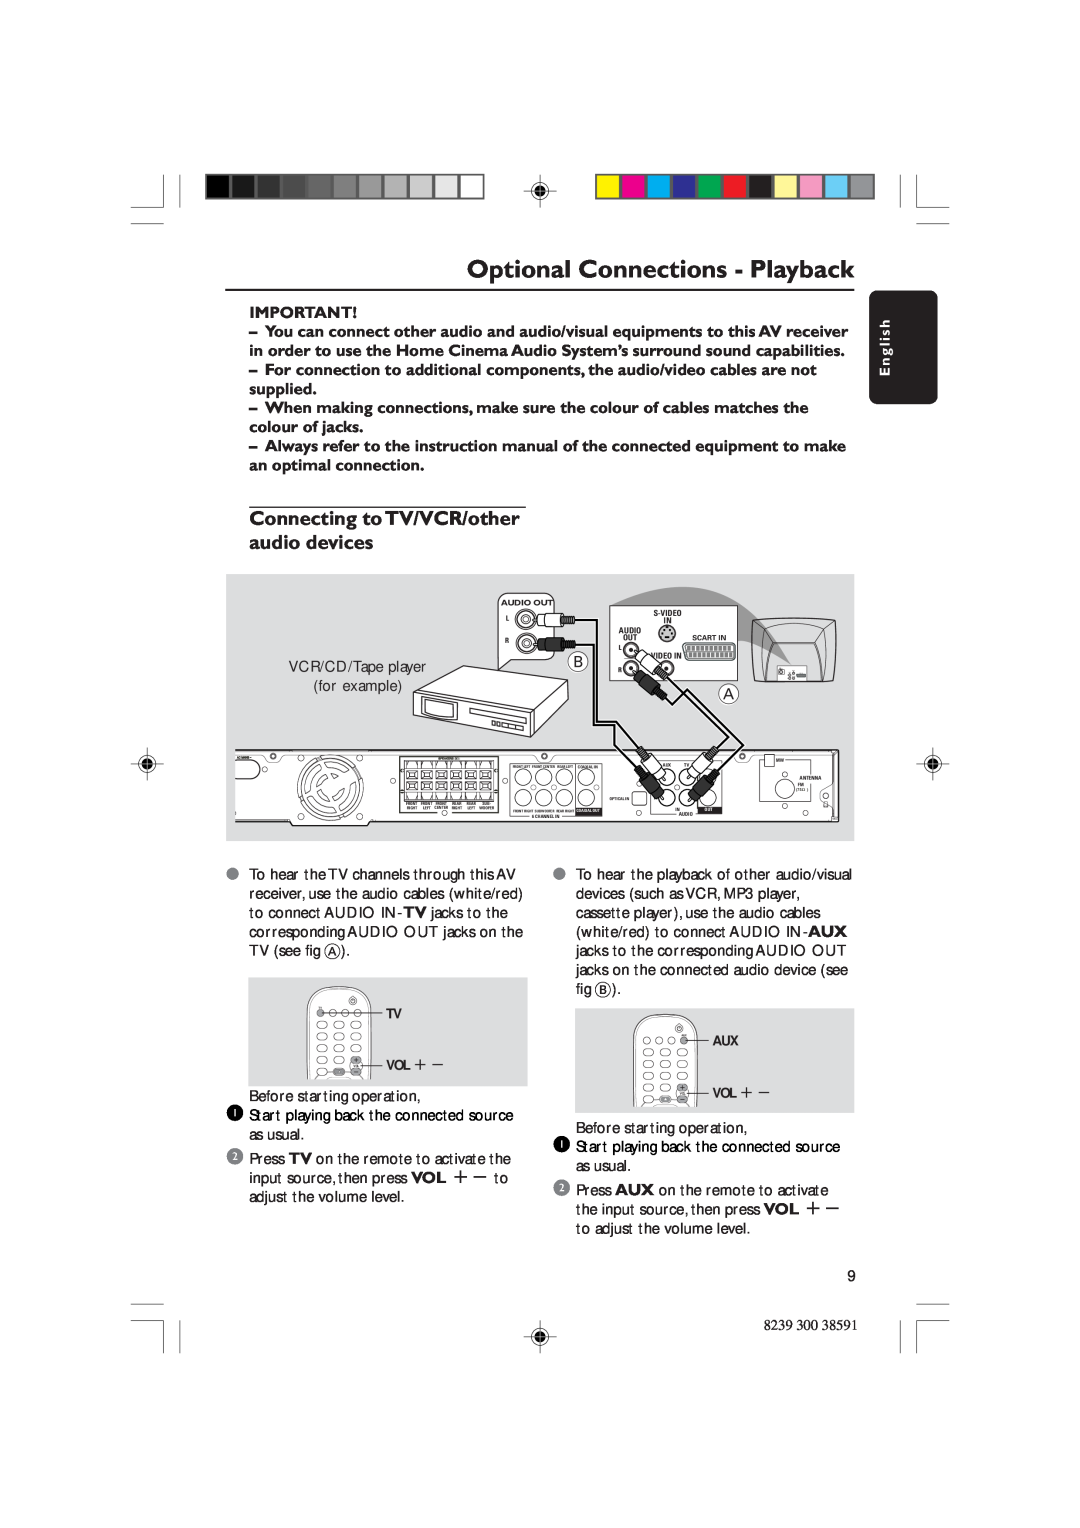 Philips HTR5000 user manual Optional Connections - Playback, Connecting to TV/VCR/other audio devices 